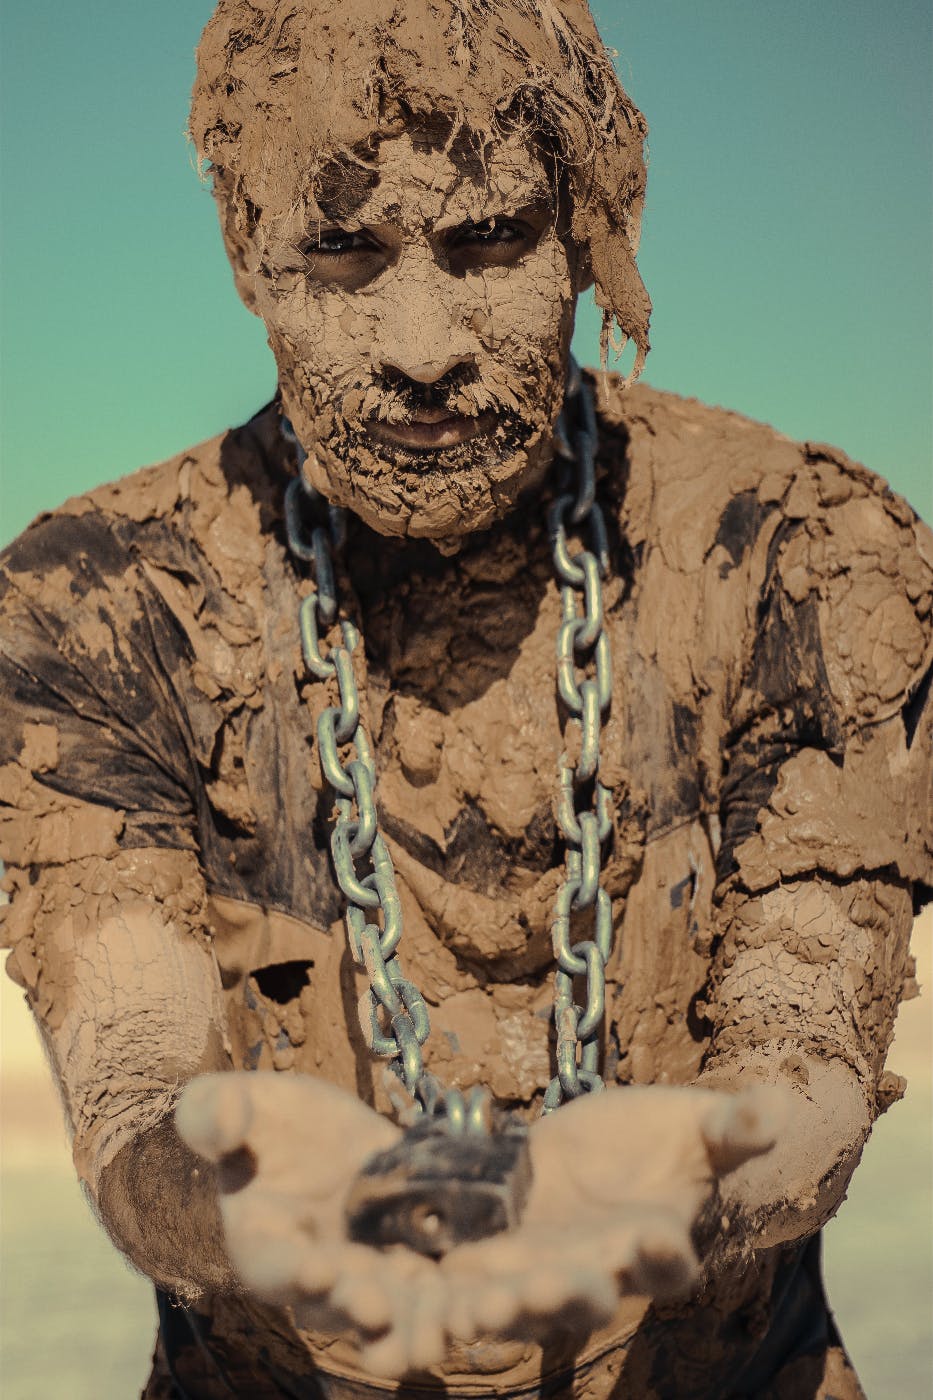 A man covered in mud with a chain around his neck holding the lock to the chain in his two outstretched hands